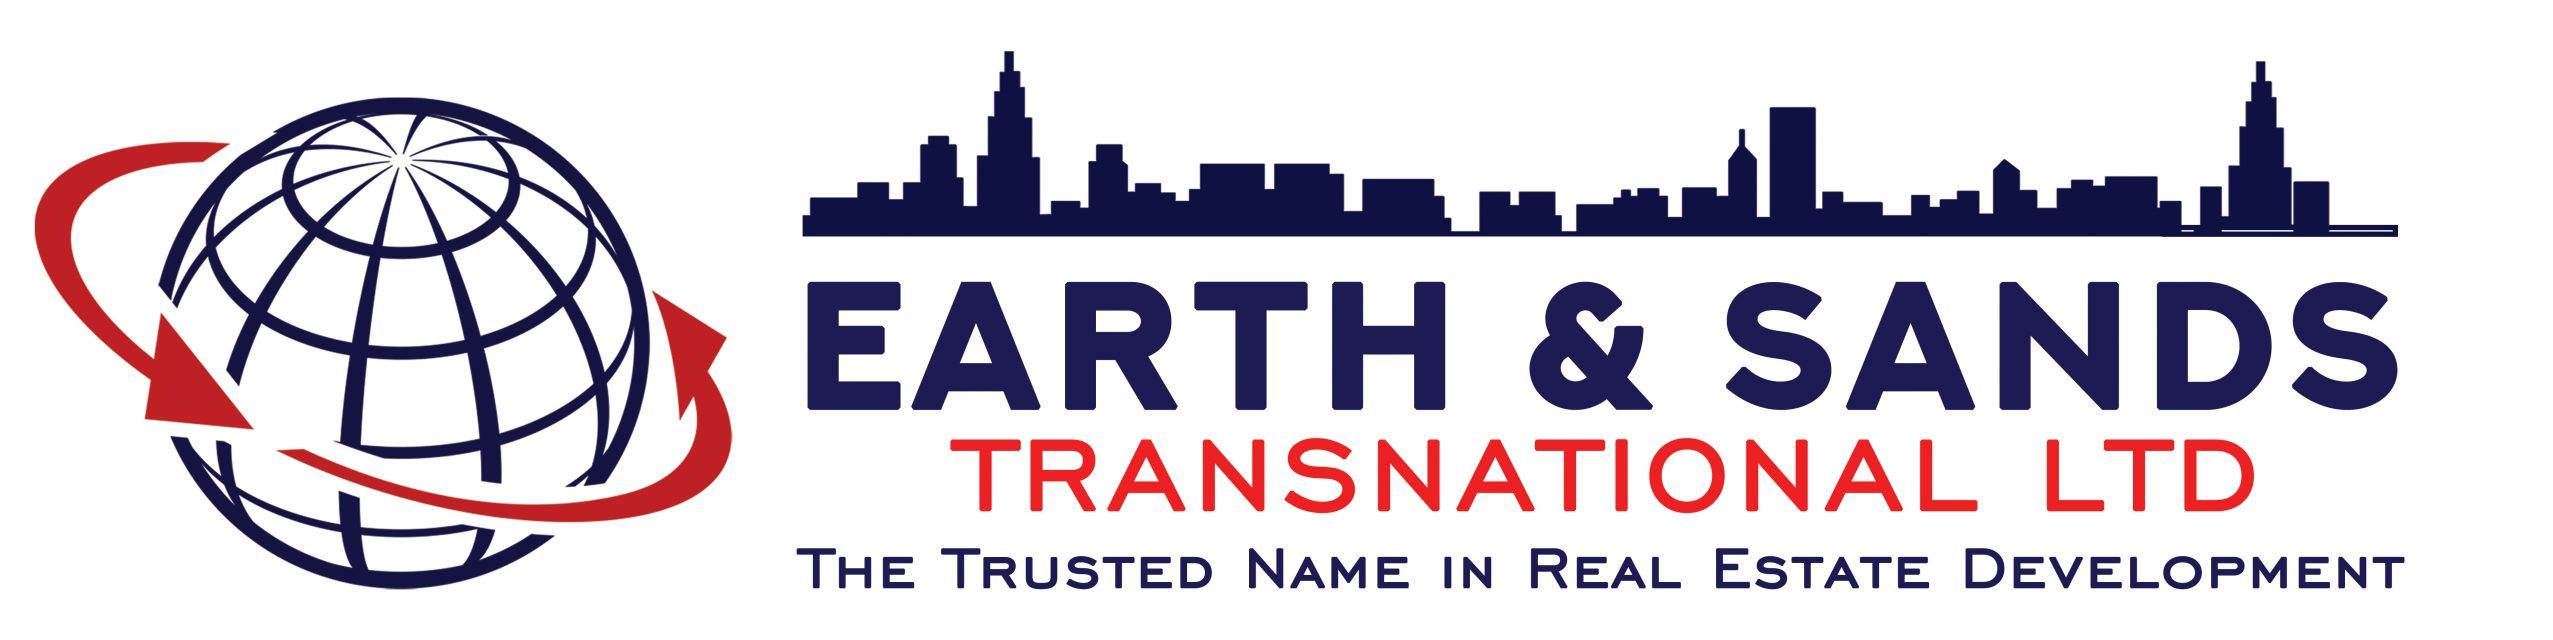 Earth and Sands Transnational